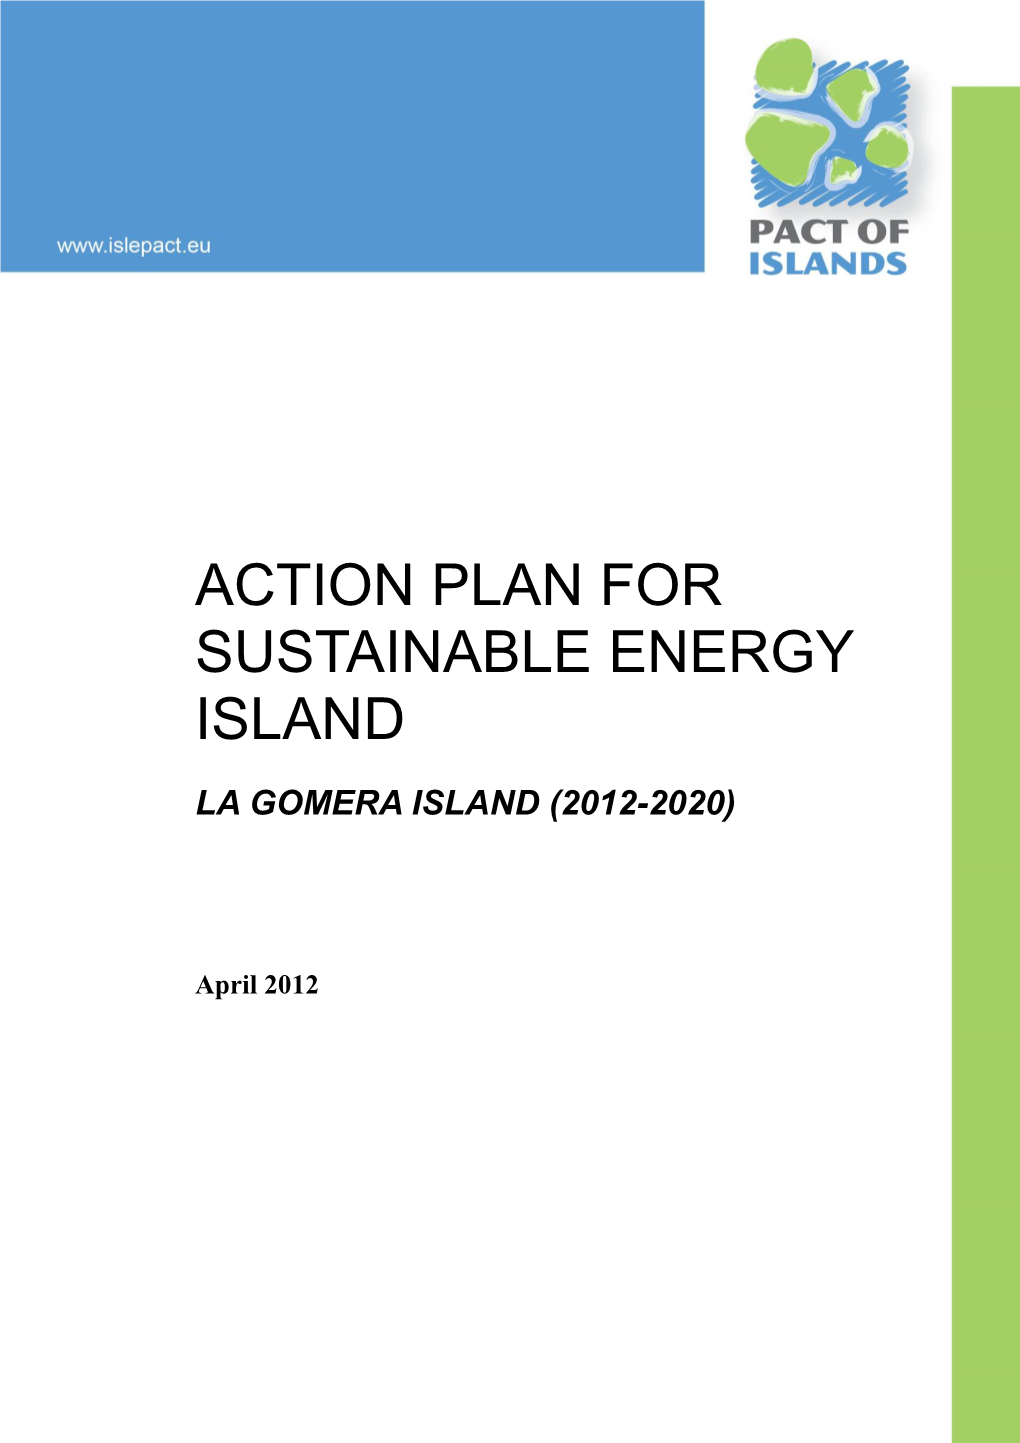 Tion Plan for Sustainable Energy Island